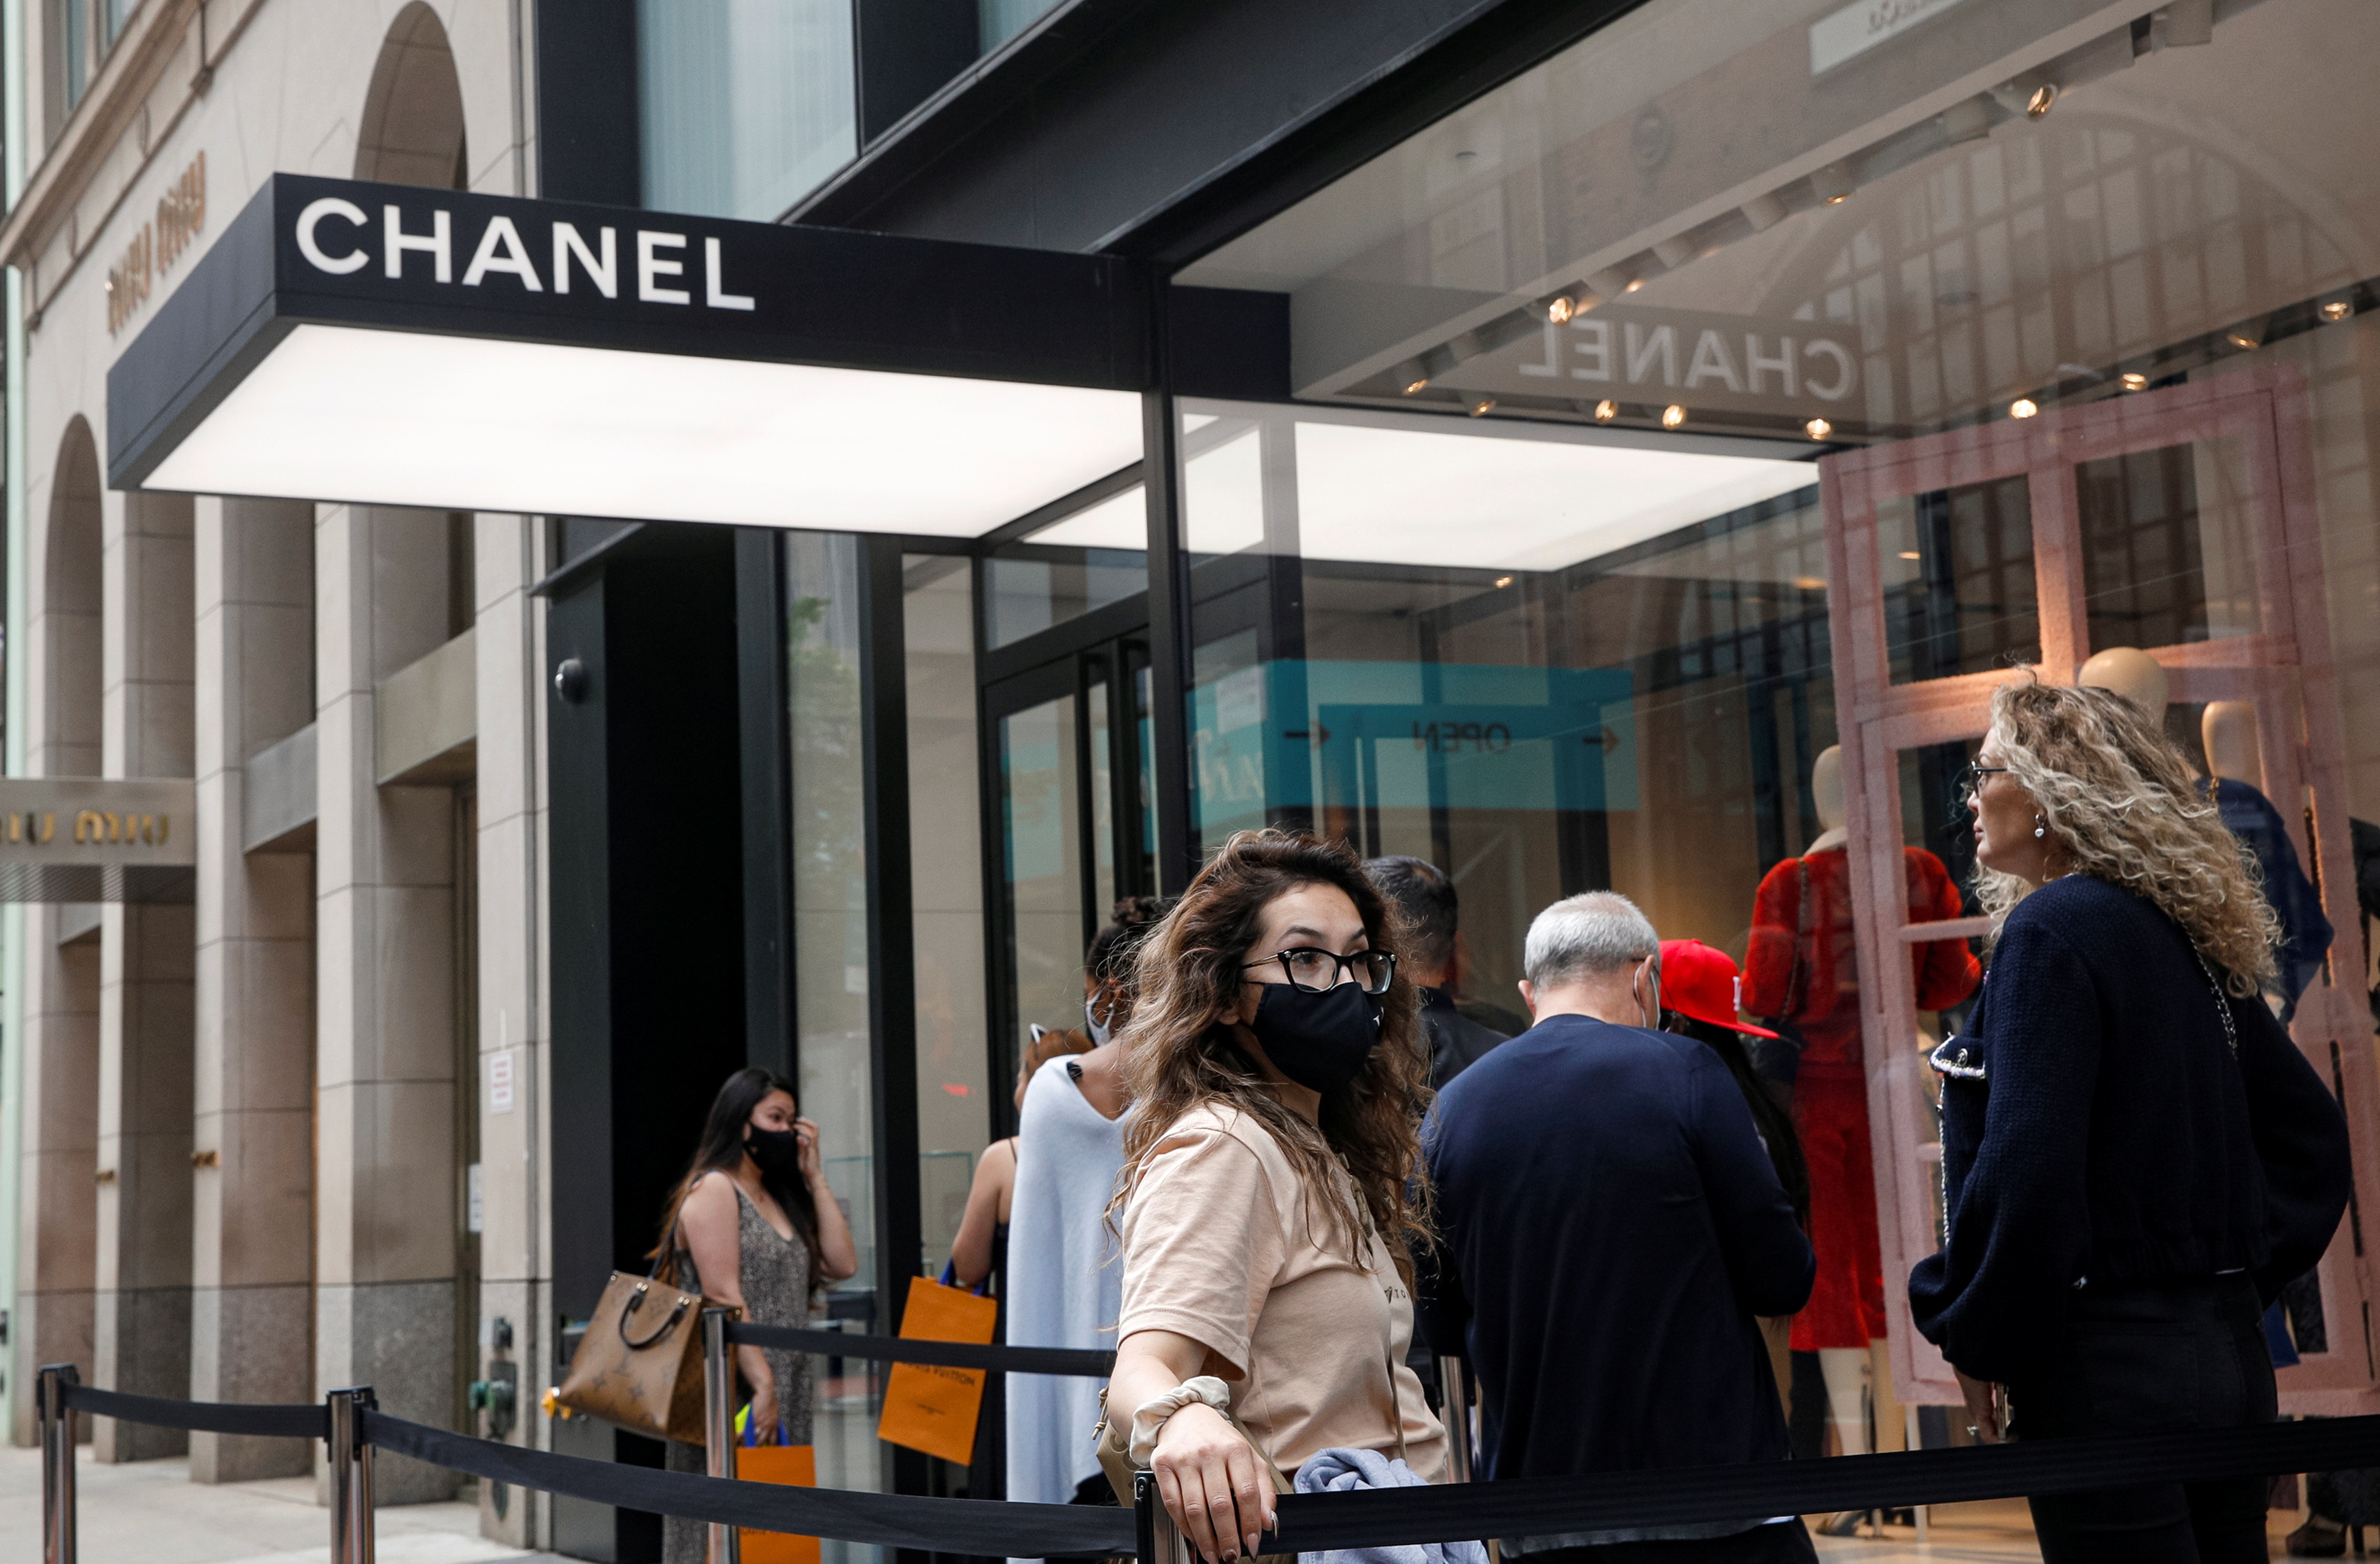 Shoppers wait in line to enter the Chanel store on 57th St in New York City, U.S., May 24, 2021.  REUTERS/Brendan McDermid